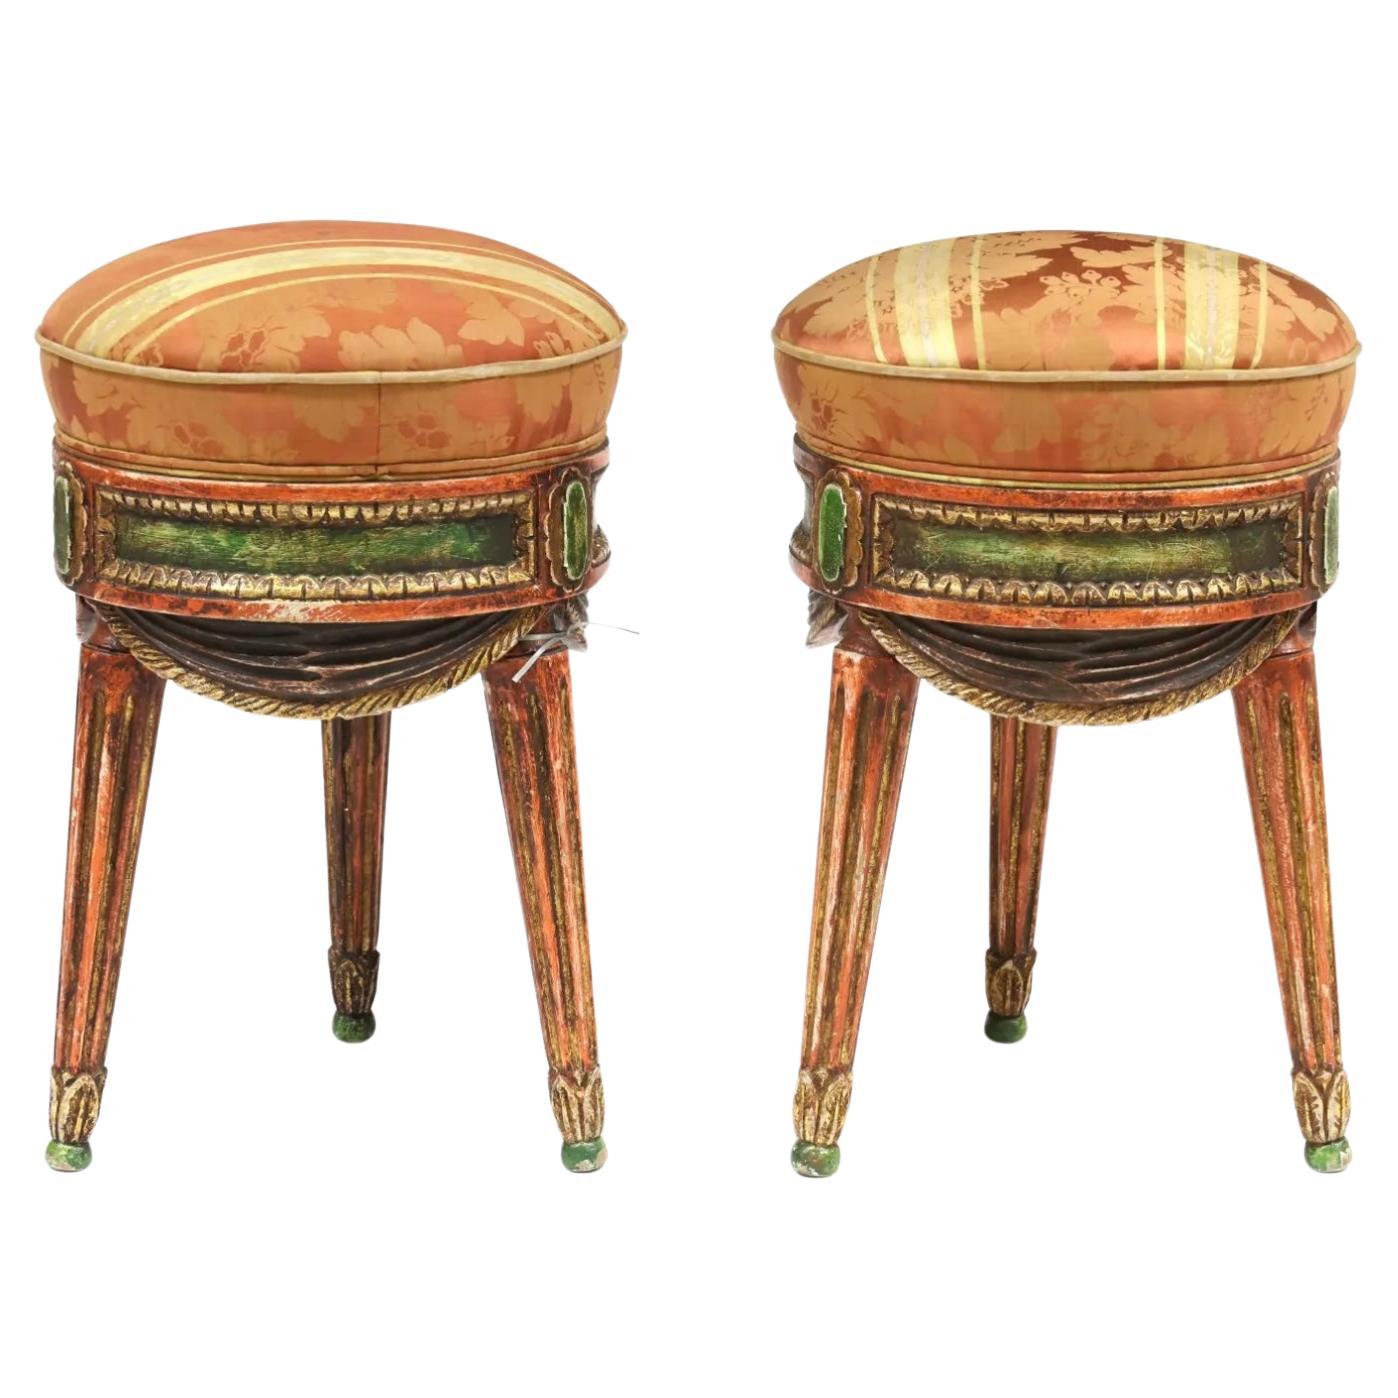 Pair of Louis XVI Style Painted Gilt Stools